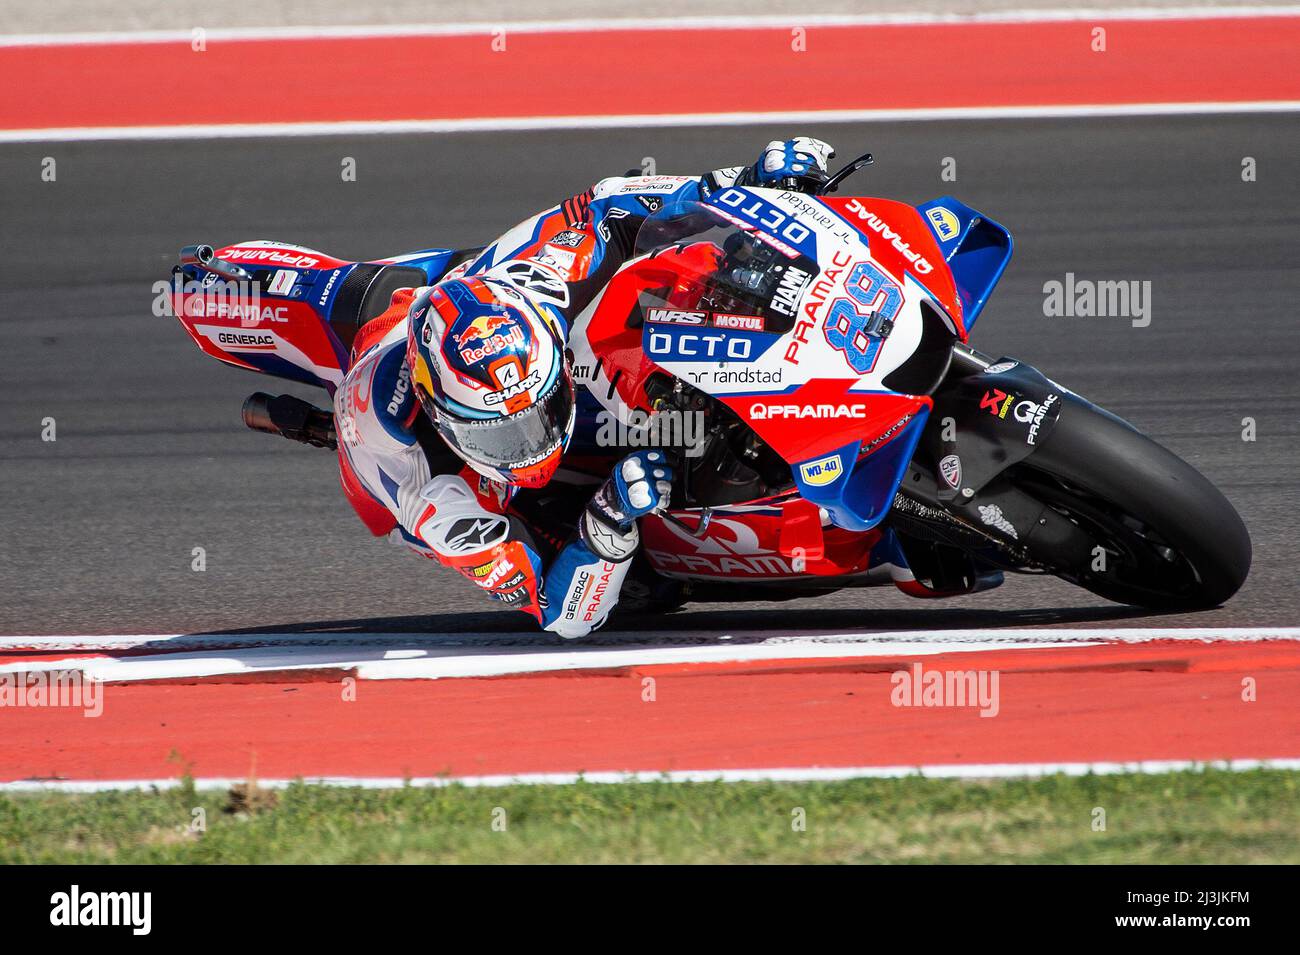 The Americas, Austin, Texas, USA. 08th Apr, 2022. Jorge Martin #89 with  Pramac Racing in action Free Practice 1 at the MotoGP Red Bull Grand Prix  of the Americas, Circuit of The